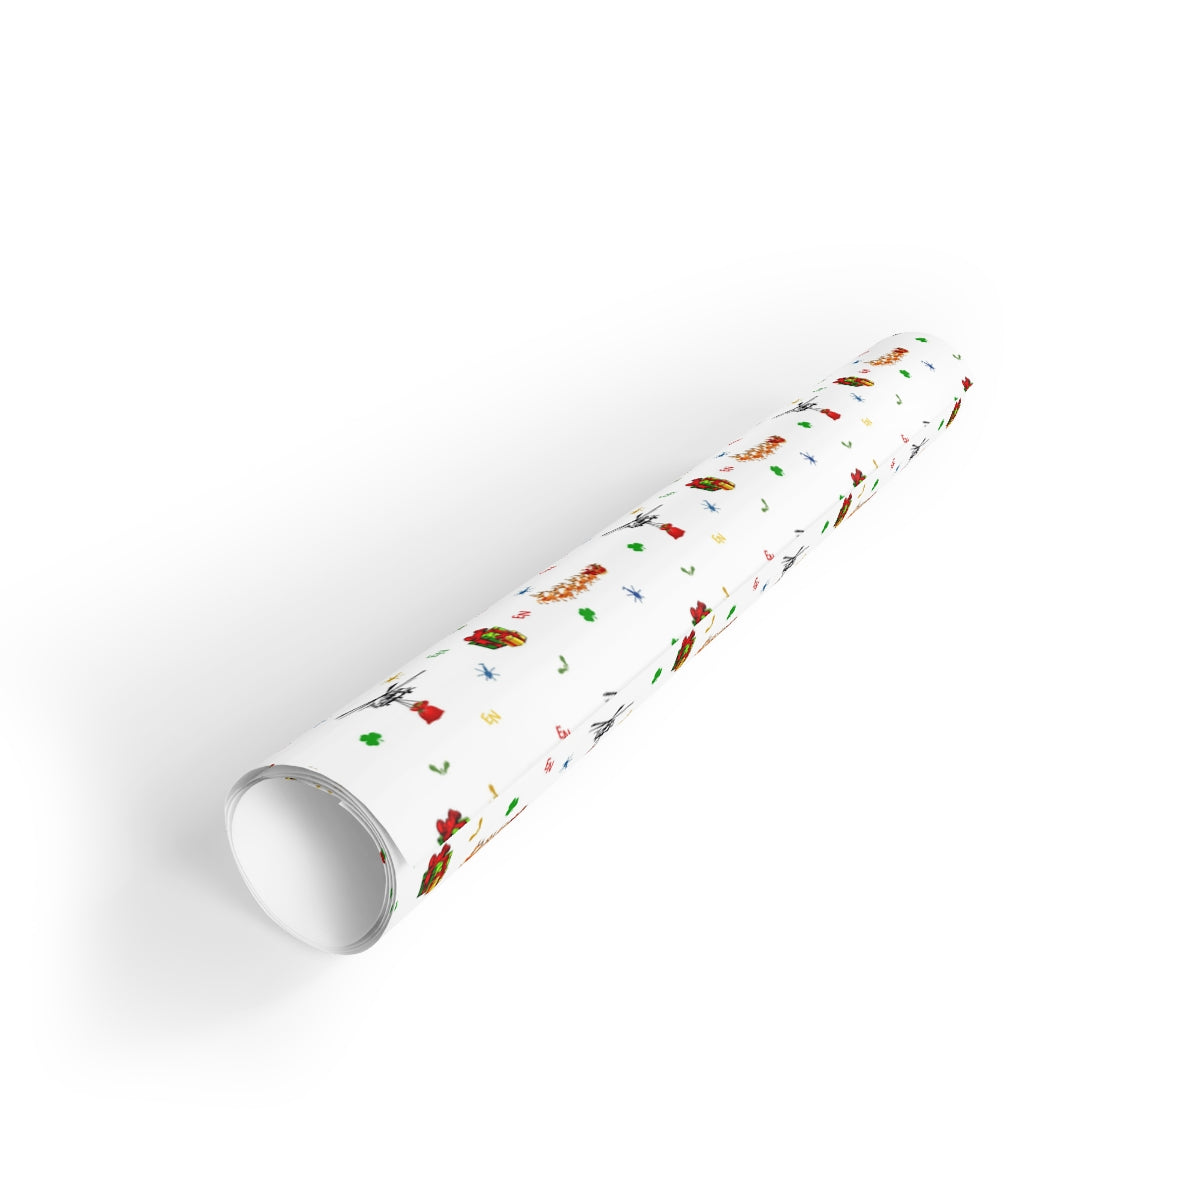 WRAPAHOLIC Gift Wrapping Paper Roll - Colorful Celebration Design with Cut  Lines for Kids Birthday, Party, Baby Shower Gift Wrap - 4 Rolls - 30 inch X  120 inch Per Roll : Amazon.in: Home & Kitchen